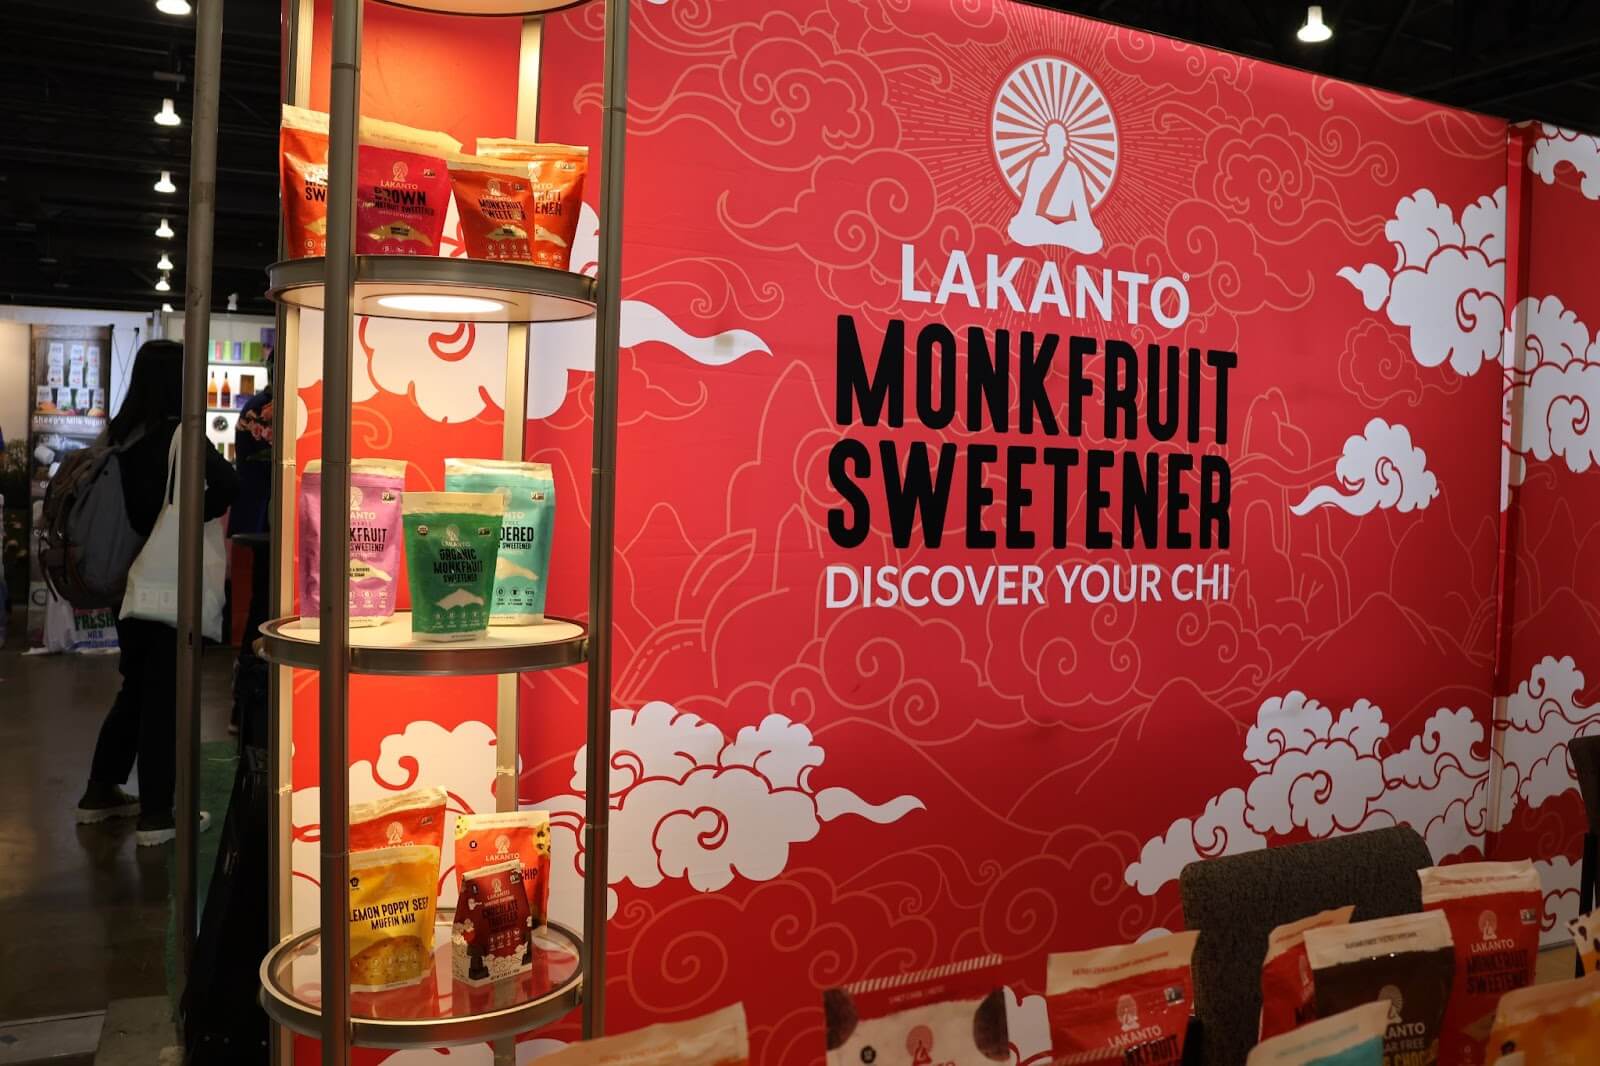 Lakanto booth at expo east 2022